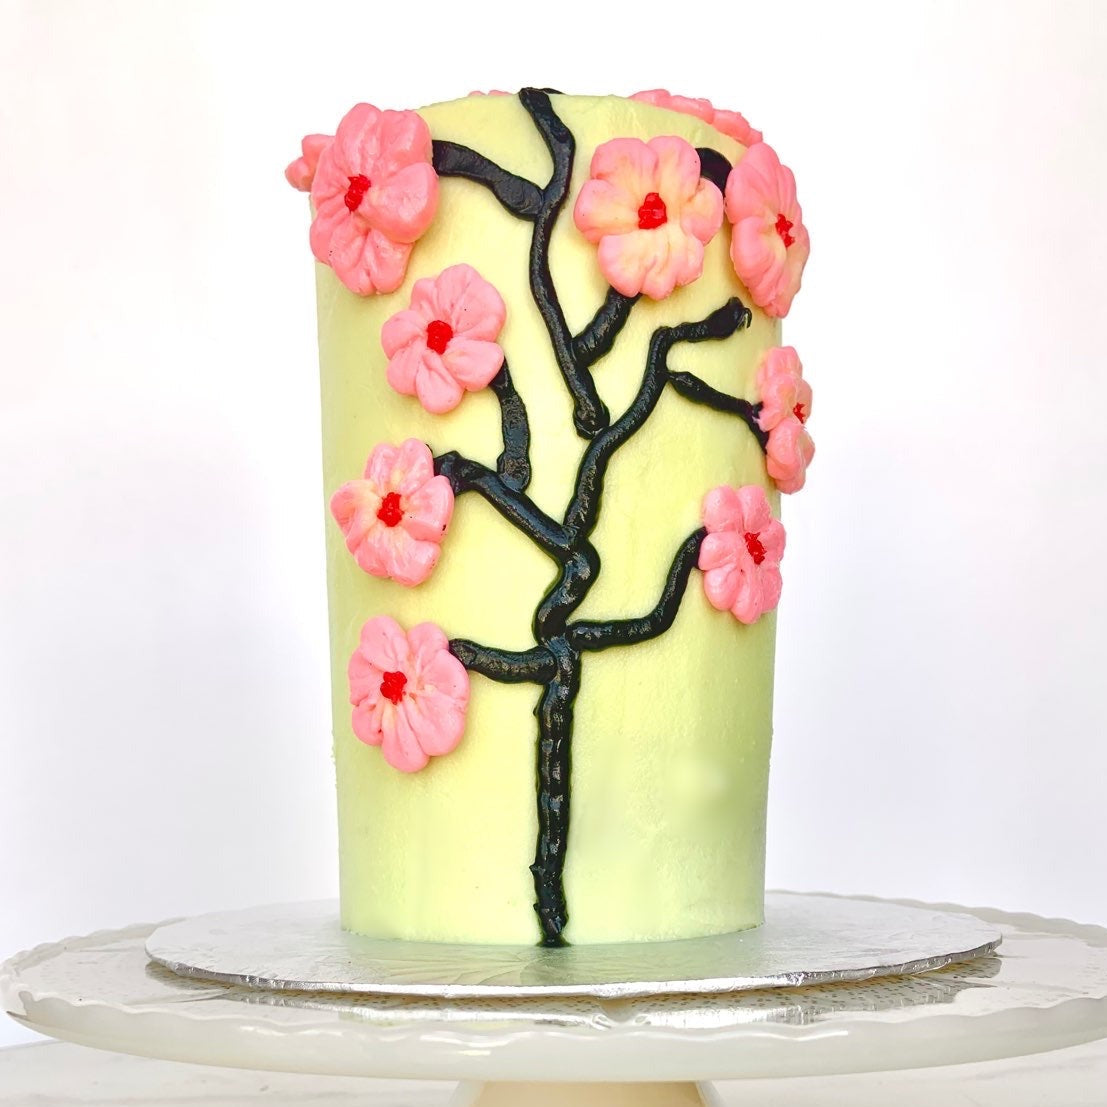 Contact Support | Cherry blossom cake, Pretty birthday cakes, Flower cake